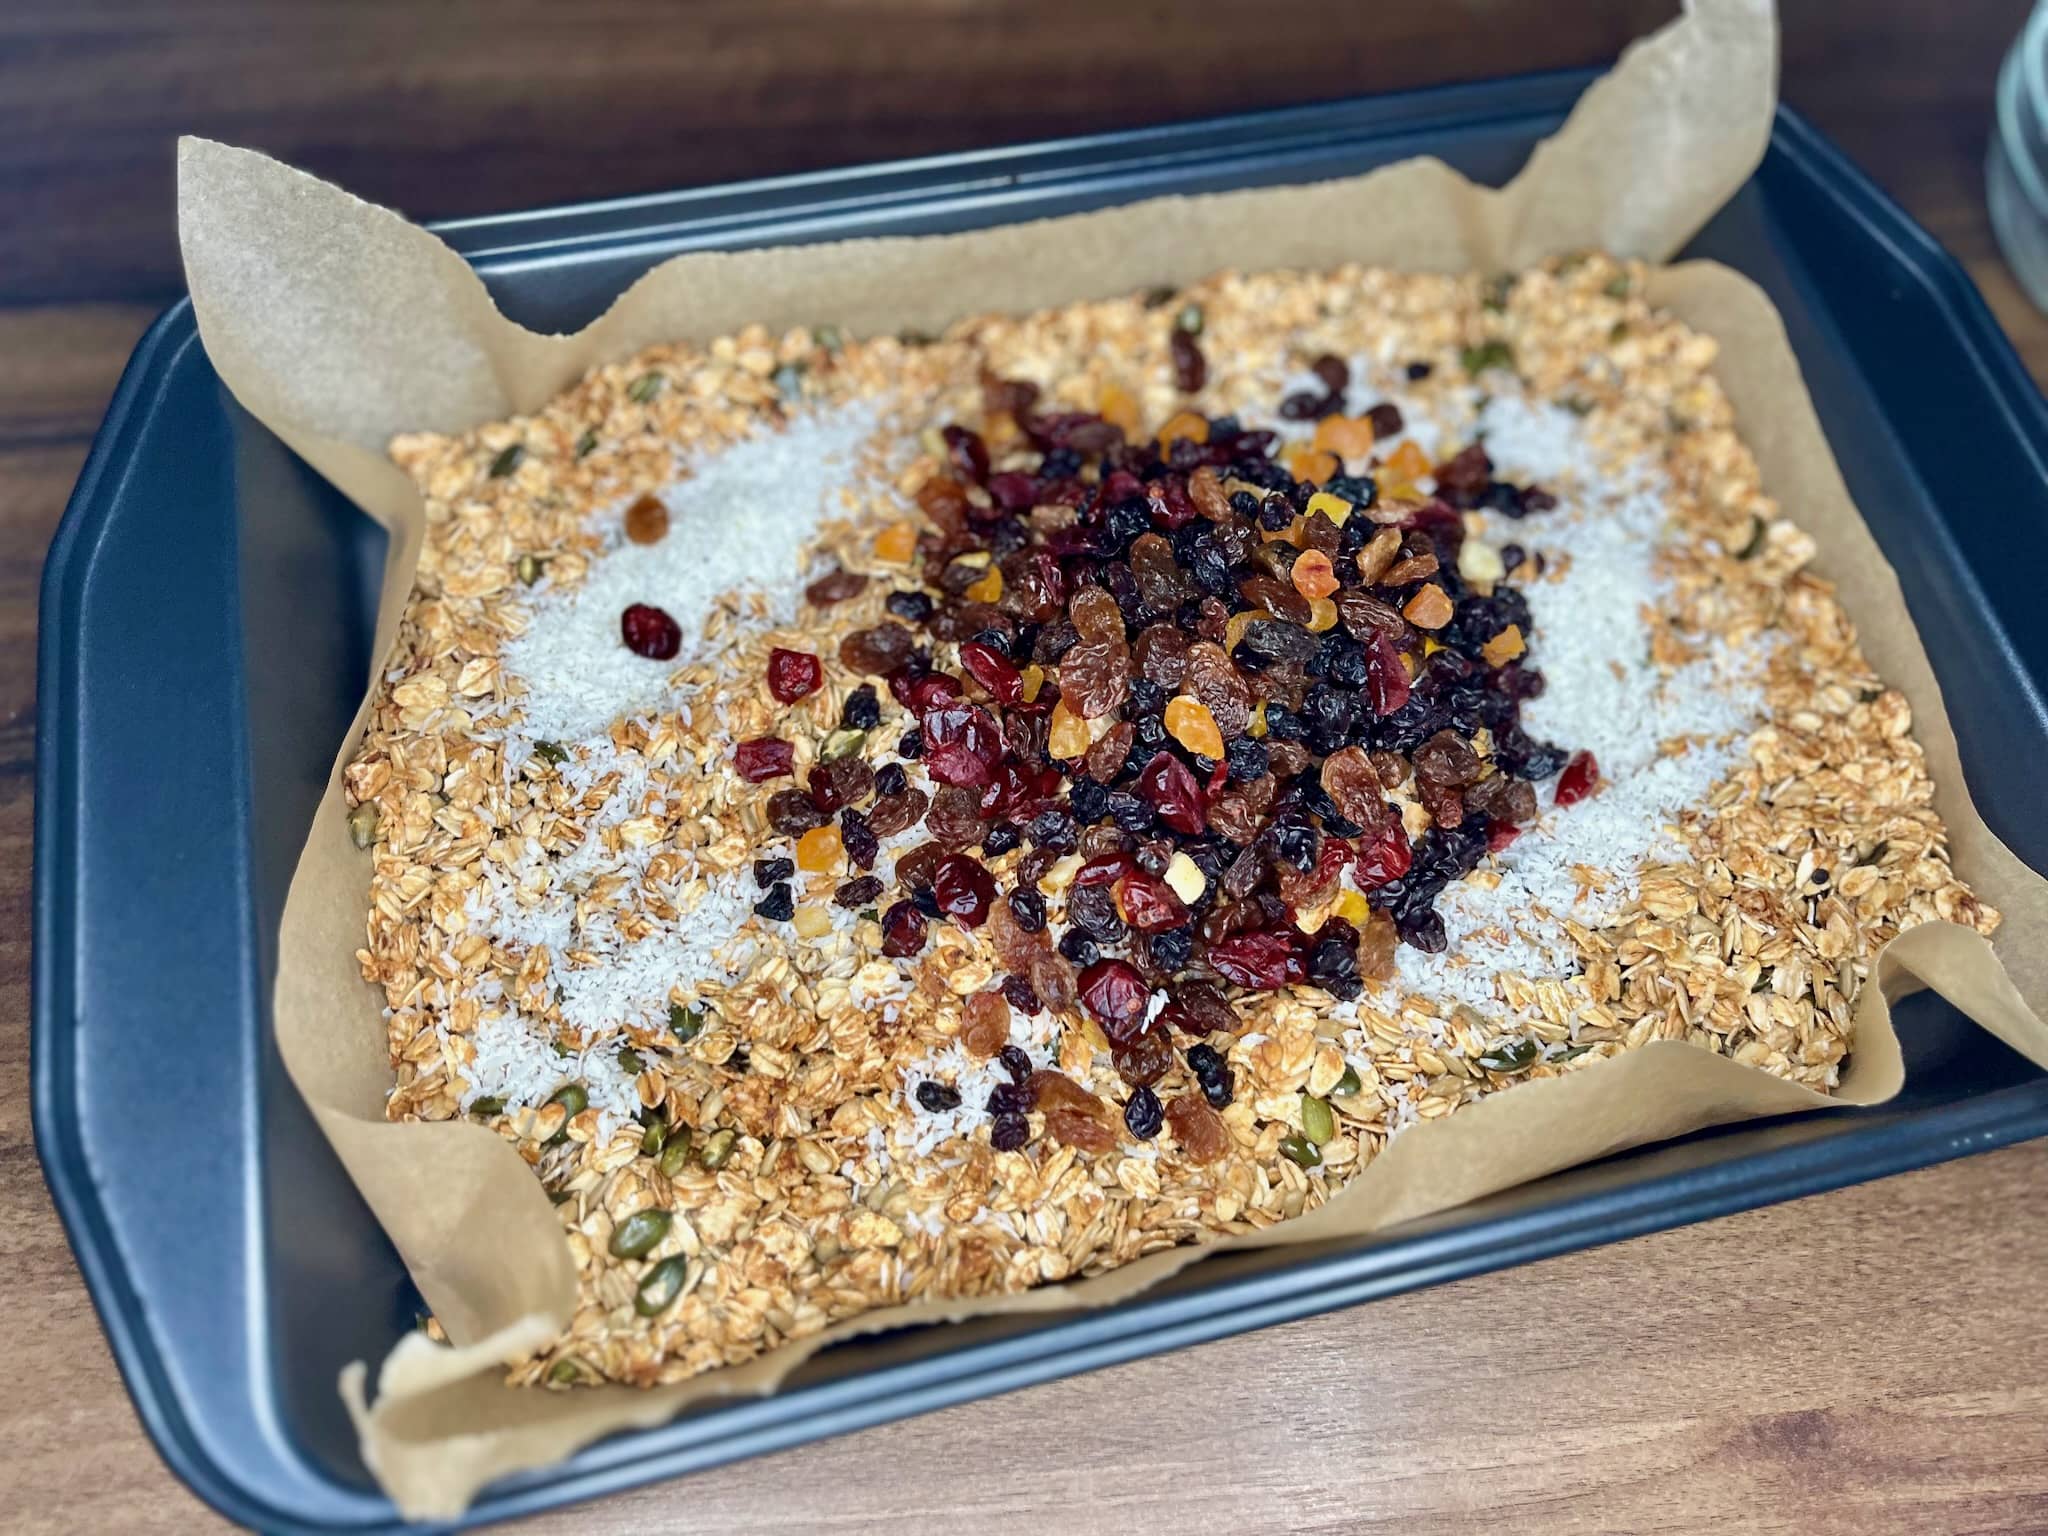 Baked oats-seeds mixture with dried mixed fruits and coconut on the top